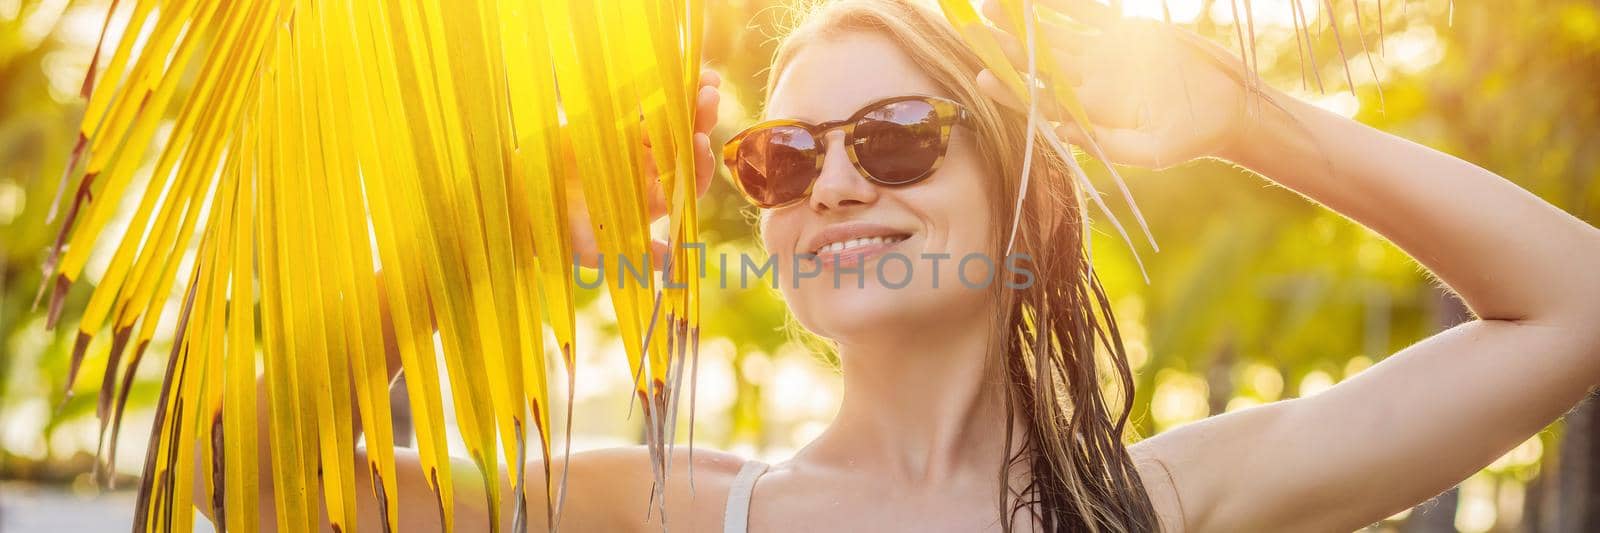 young beautiful woman in swimsuit on tropical beach, summer vacation, palm tree leaf, tanned skin, sand, smiling, happy. Happy traveller woman BANNER, LONG FORMAT by galitskaya